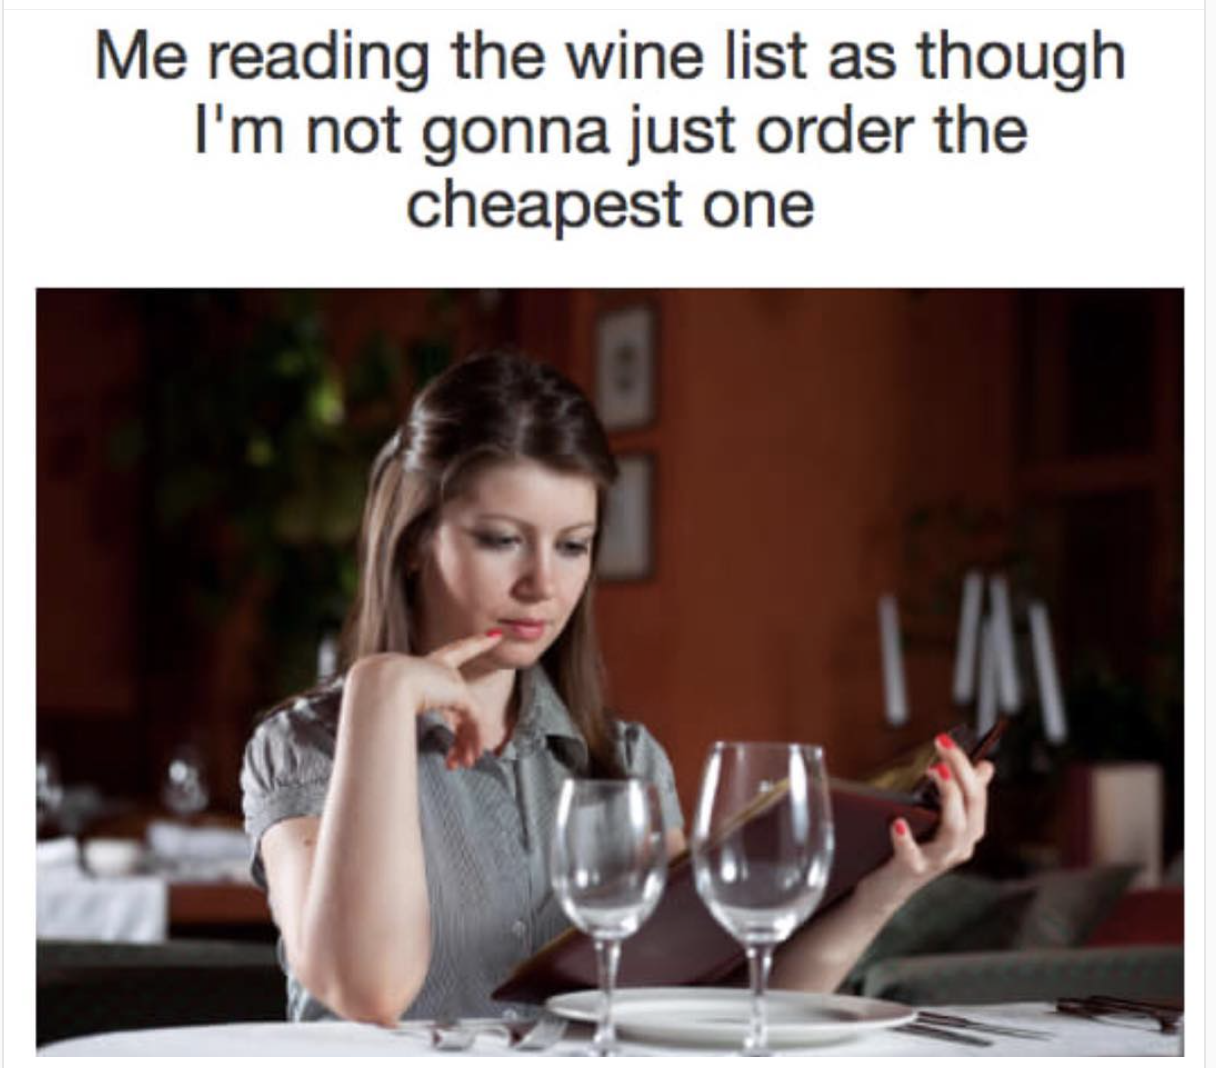 memes - wine glass - Me reading the wine list as though I'm not gonna just order the cheapest one